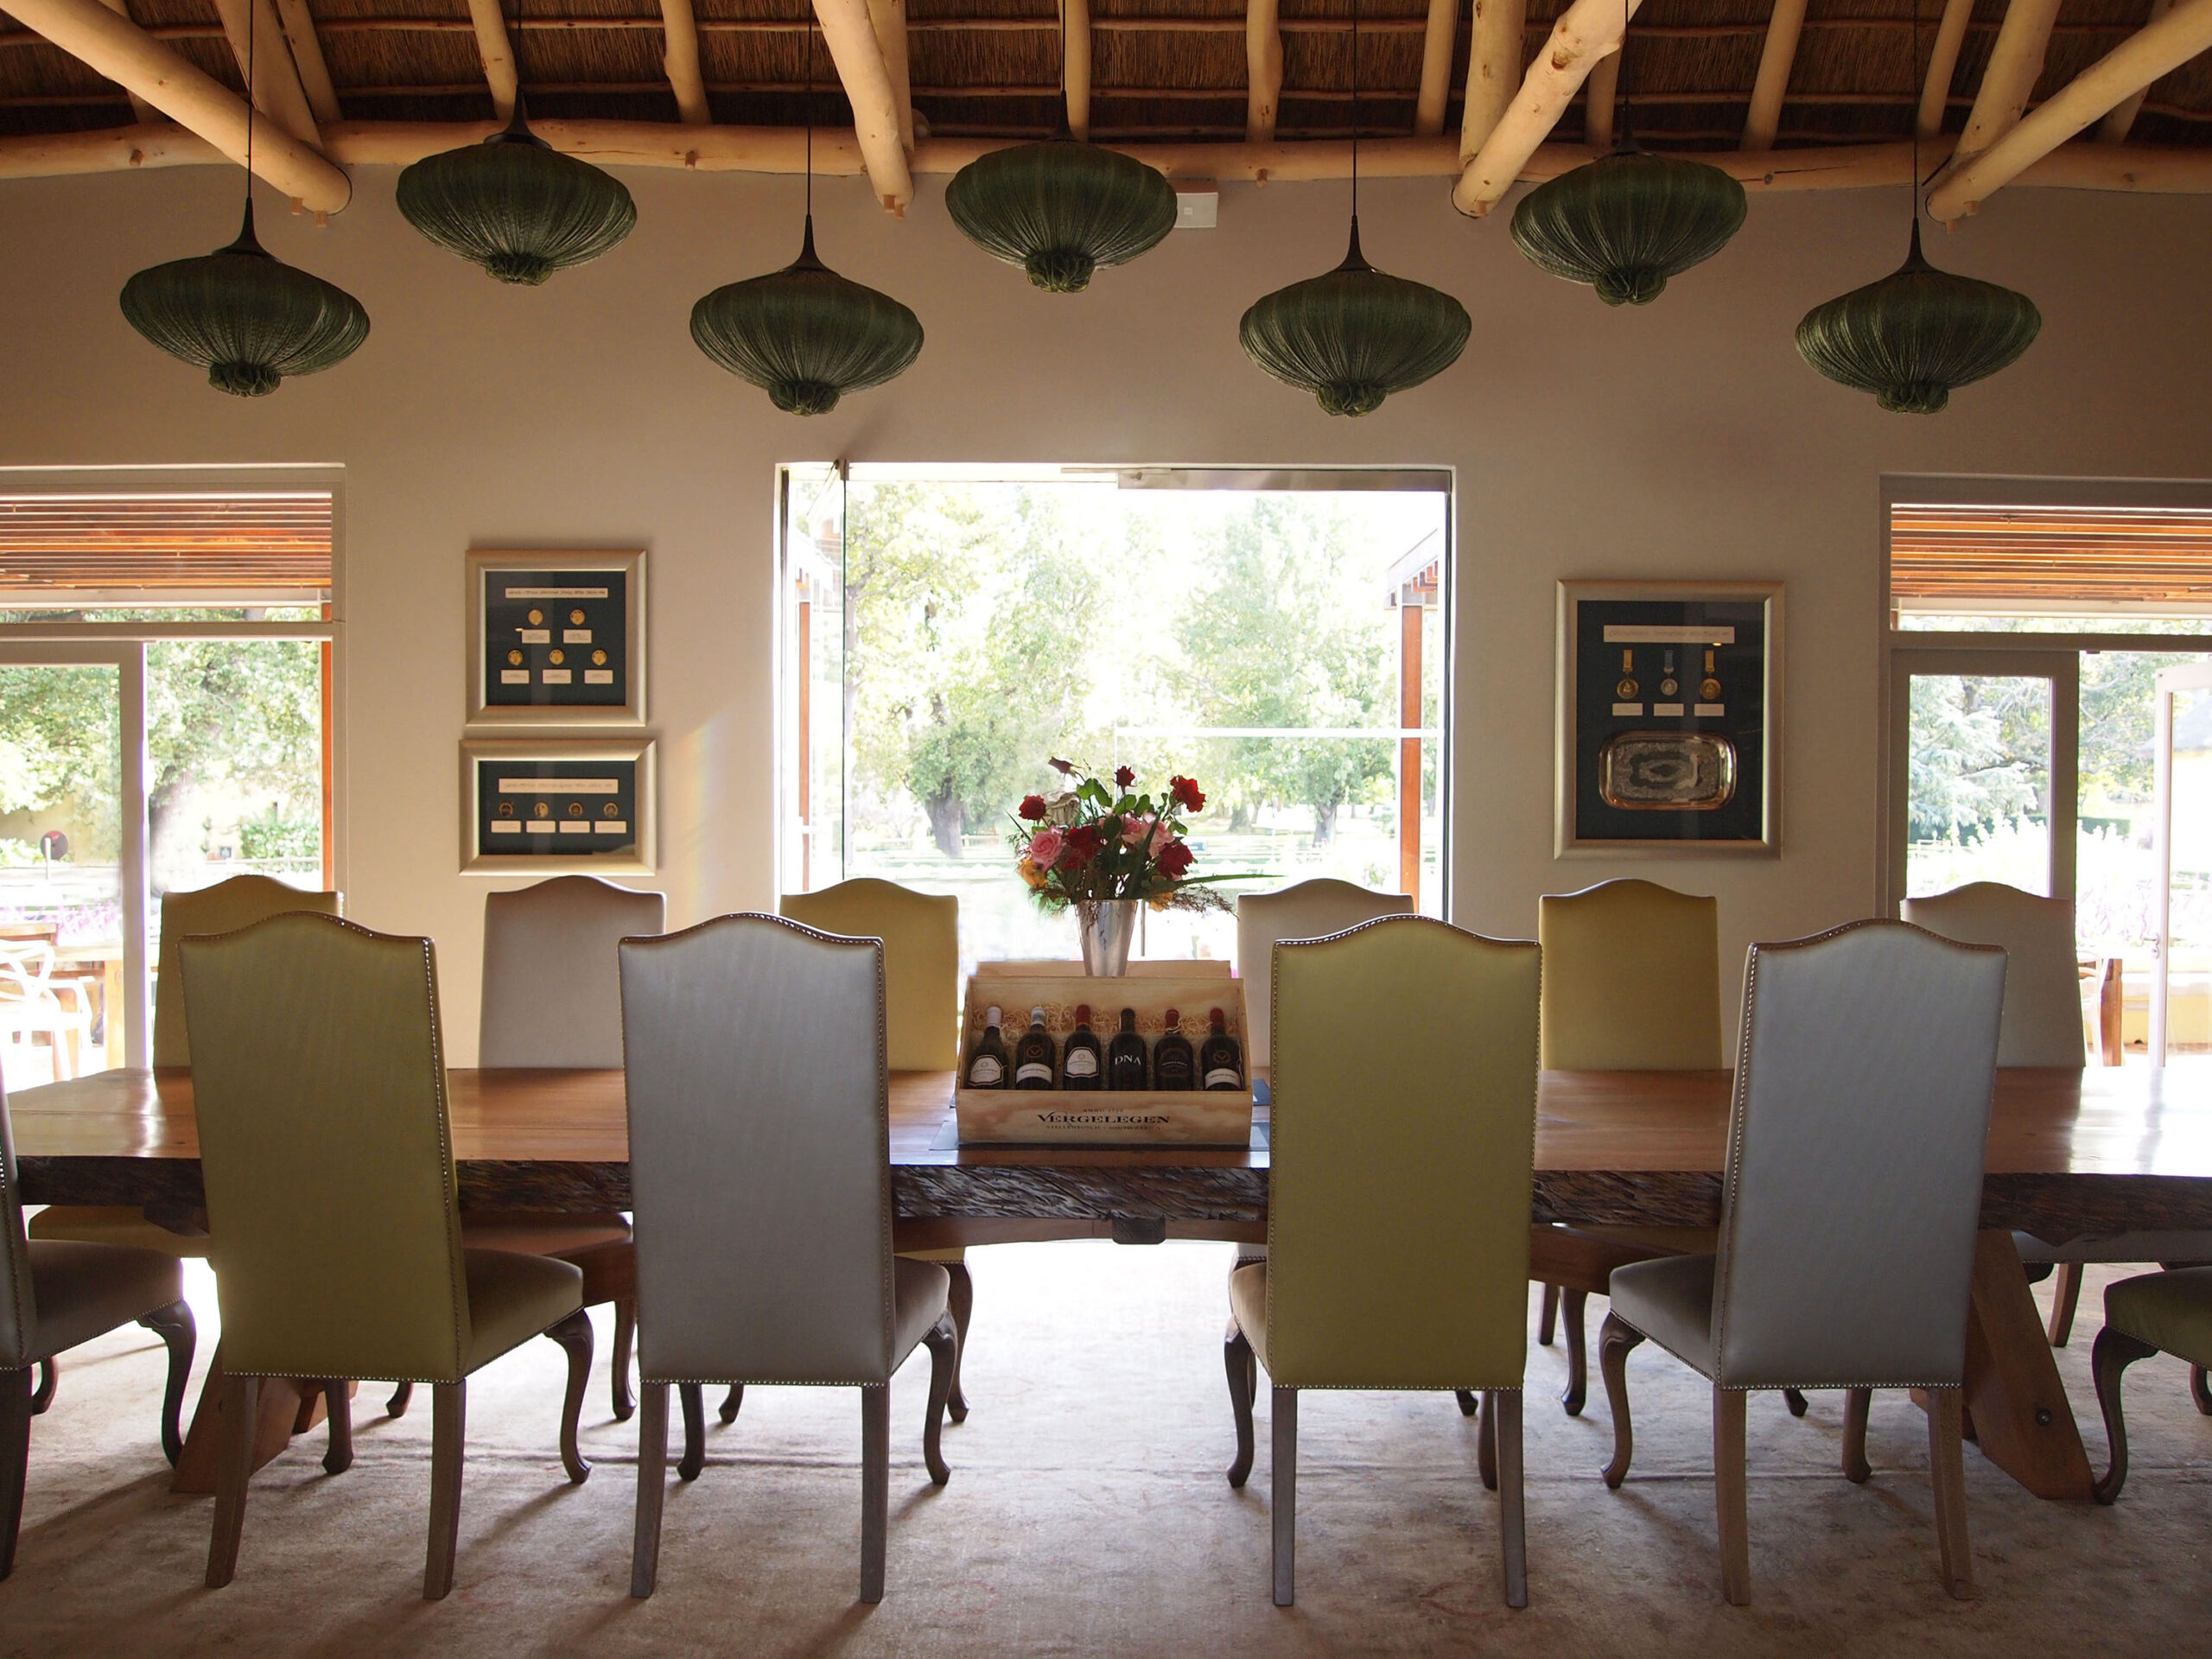 Interior dining room with exposed beam ceiling